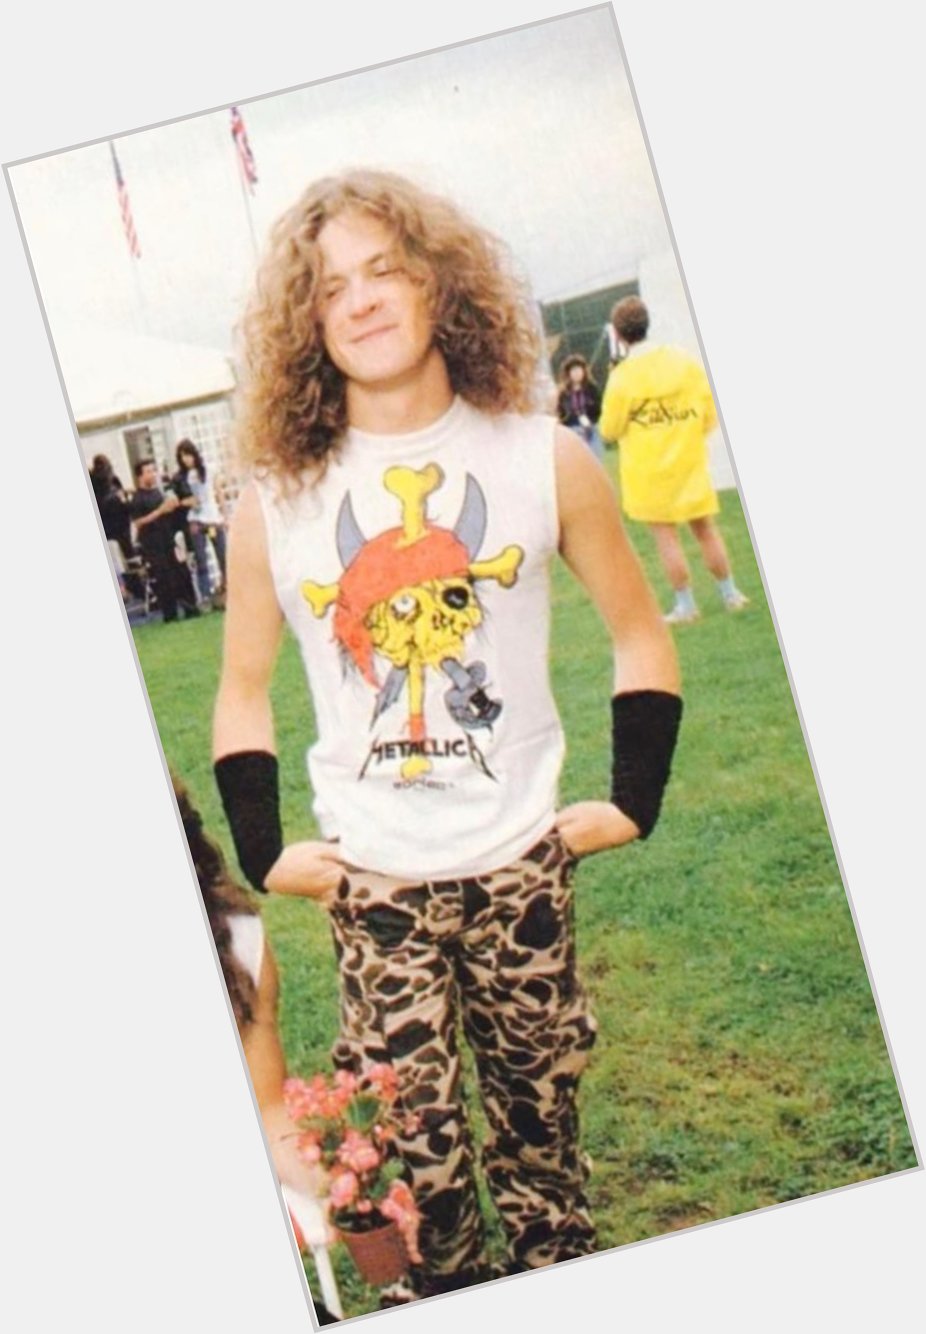 HAPPY 59TH BIRTHDAY JASON NEWSTED!!! thank you for all your contributions to the world of music 